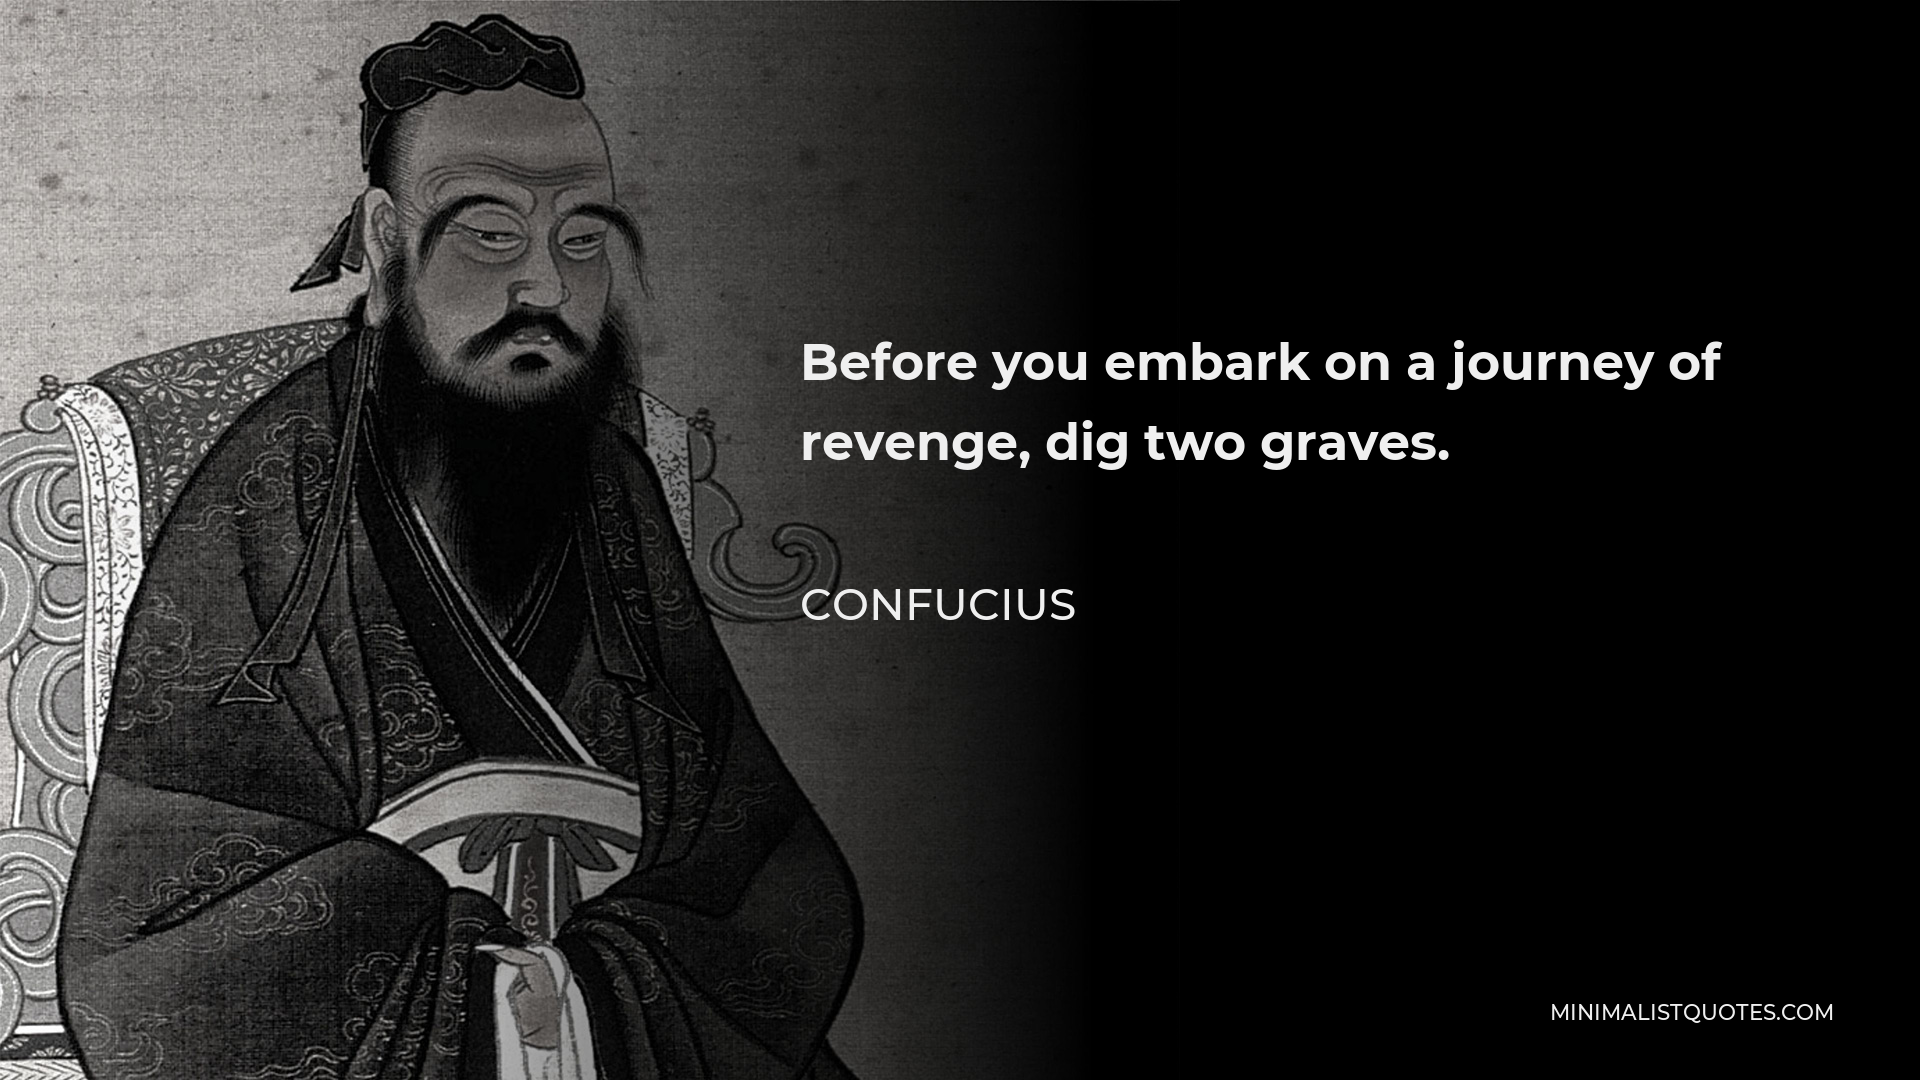 Confucius Quote - Before you embark on a journey of revenge, dig two graves.